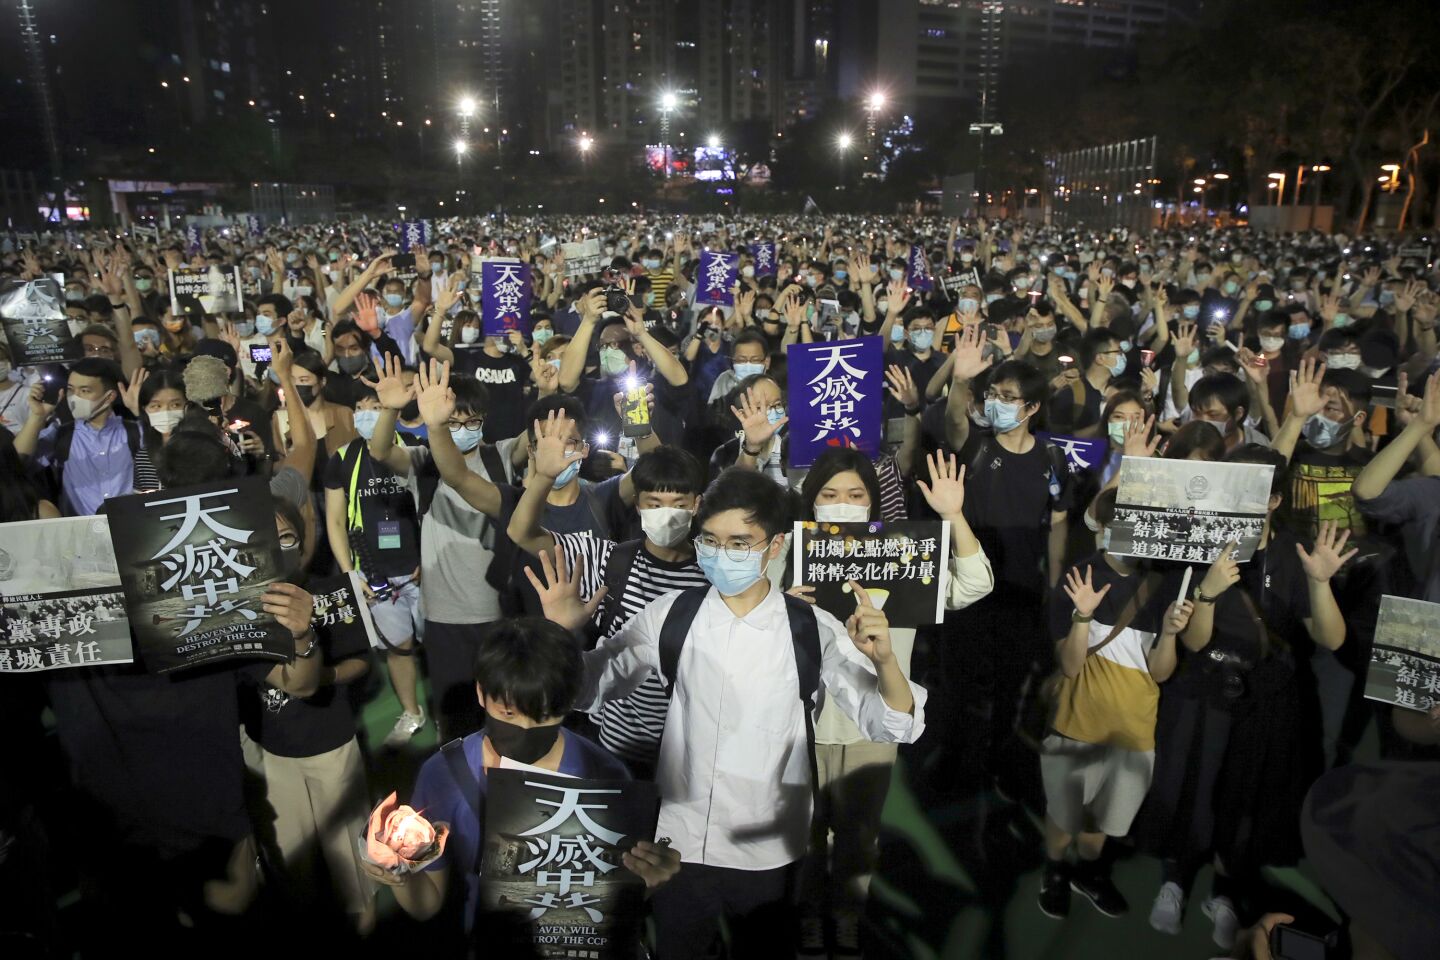 Participants gesture with five fingers, signifying the "Five demands - not one less" and posters read "Heaven will destroy the CCP" during a vigil for the victims of the 1989 Tiananmen Square Massacre.